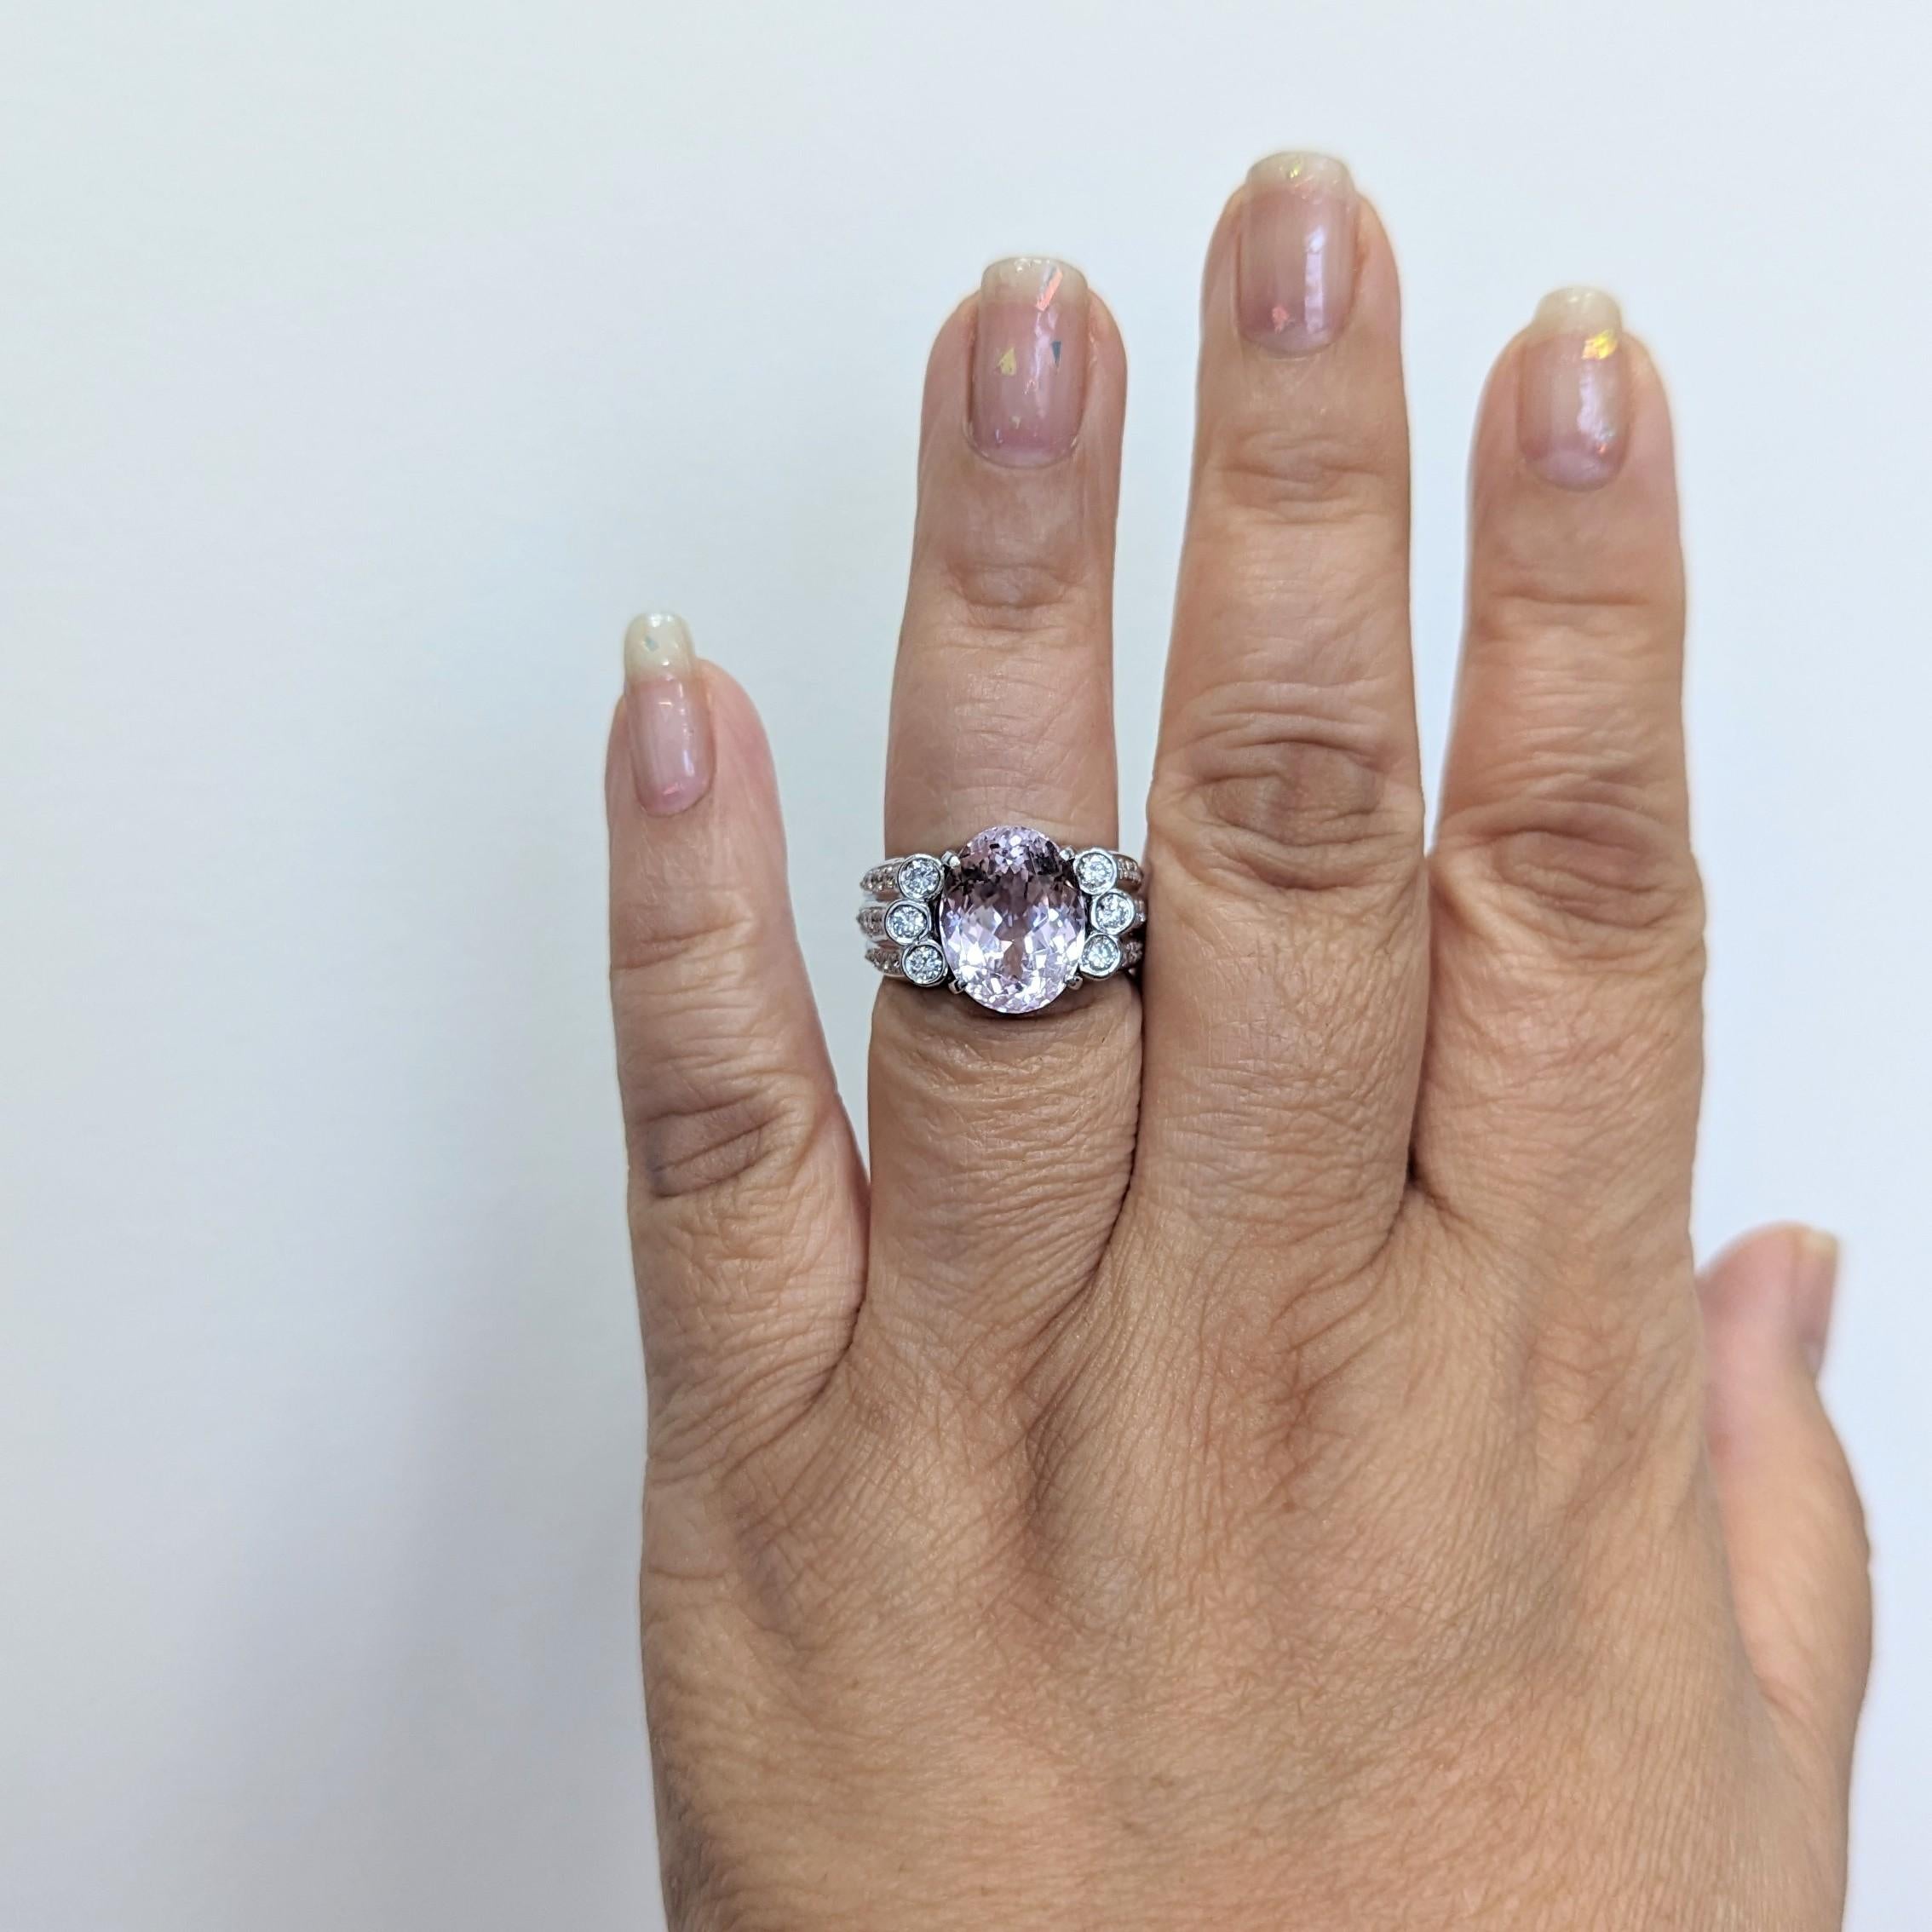 Beautiful 7.29 ct. pink kunzite oval with 0.70 ct. good quality white diamond rounds.  Handmade in platinum.  Ring size 7.